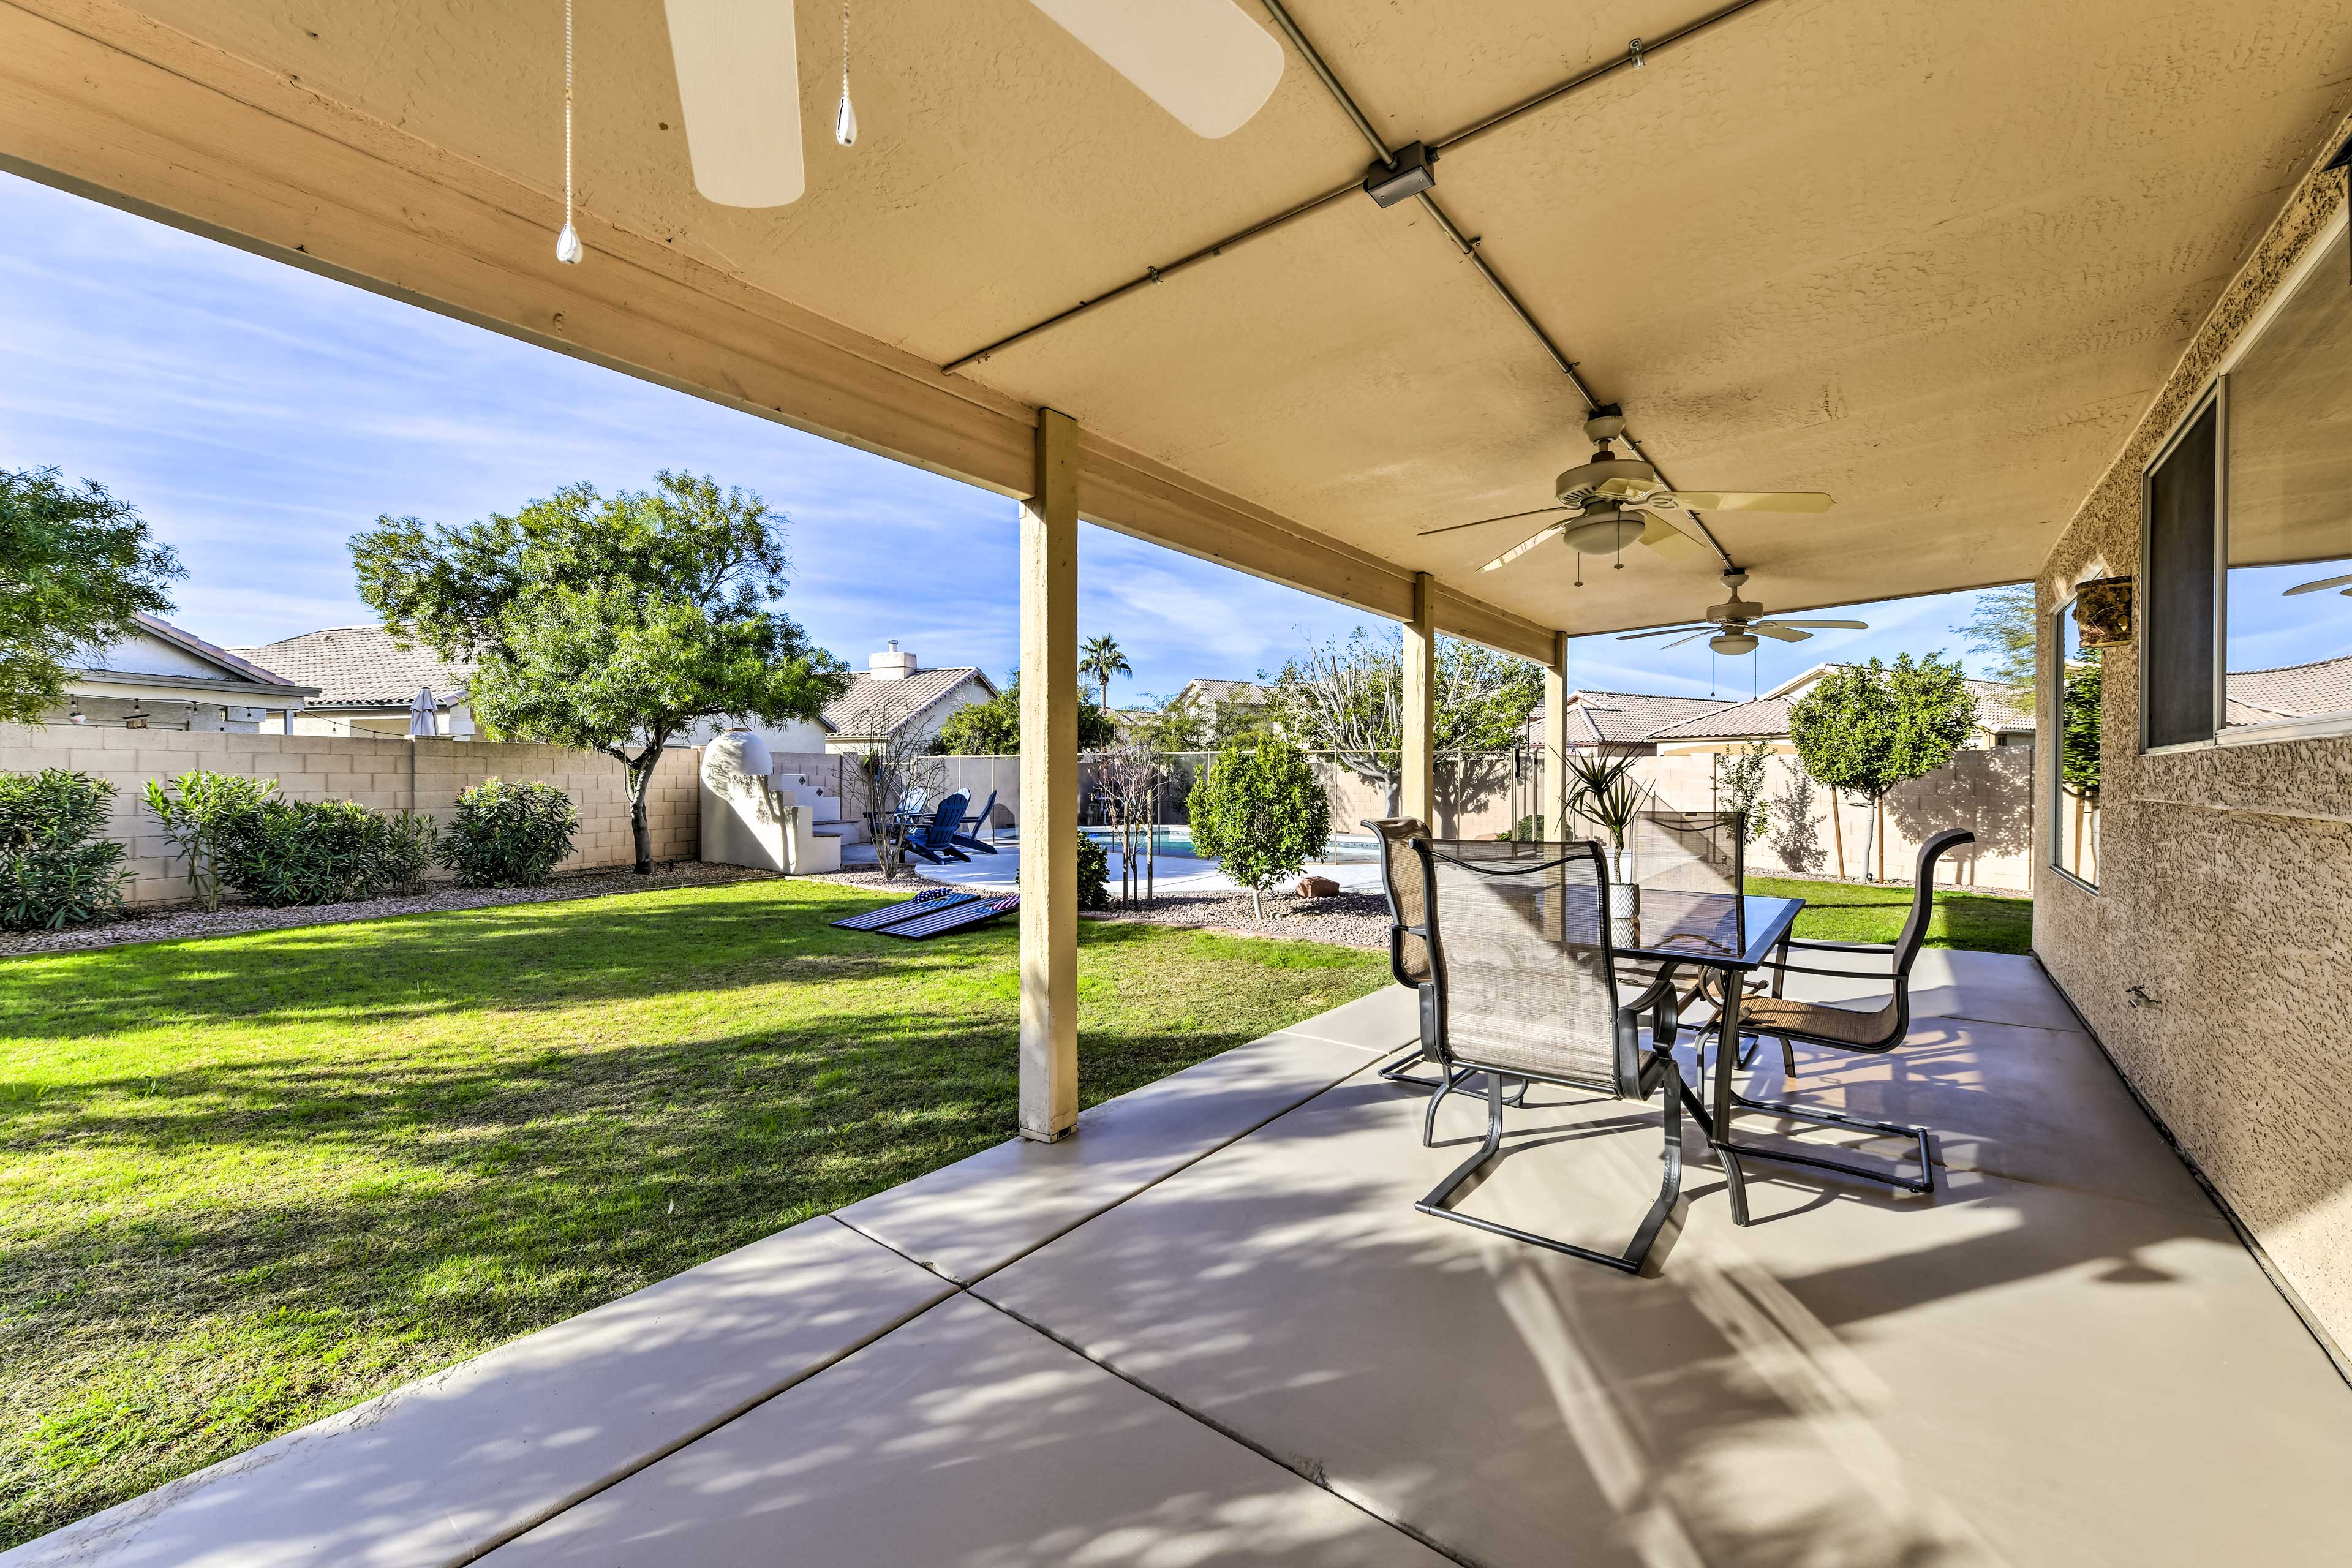 Covered Patio | Backyard | Gas Grill